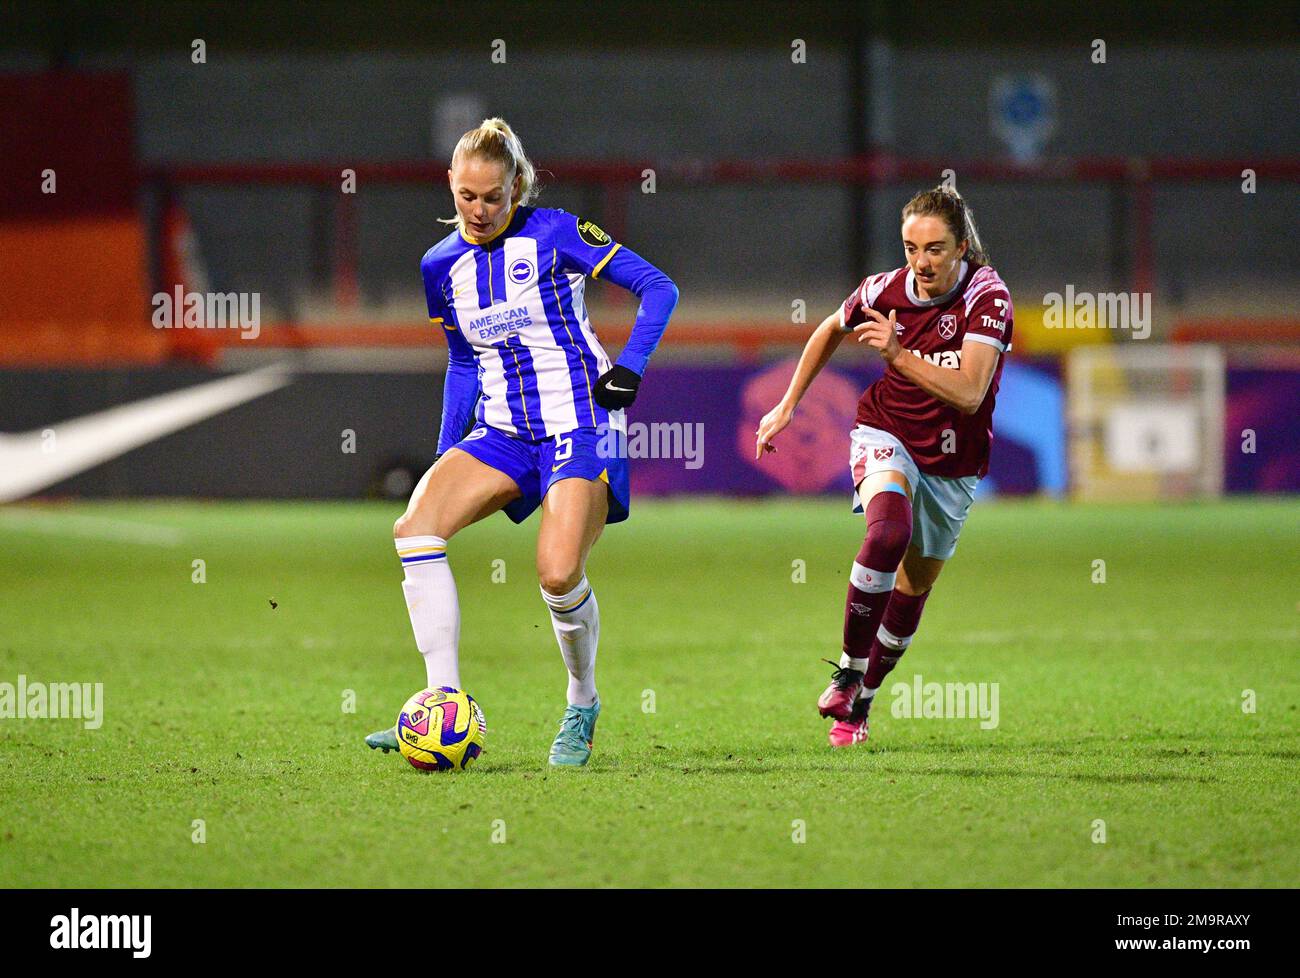 Crawley, UK. 18th Jan, 2023. Guro Bergsvand of Brighton and Hove Albion and Lisa Evans of West Ham United of West Ham United during the FA Women's League Cup Group C match between Brighton & Hove Albion Women and West Ham United Ladies at The People's Pension Stadium on January 18th 2023 in Crawley, United Kingdom. (Photo by Jeff Mood/phcimages.com) Credit: PHC Images/Alamy Live News Stock Photo